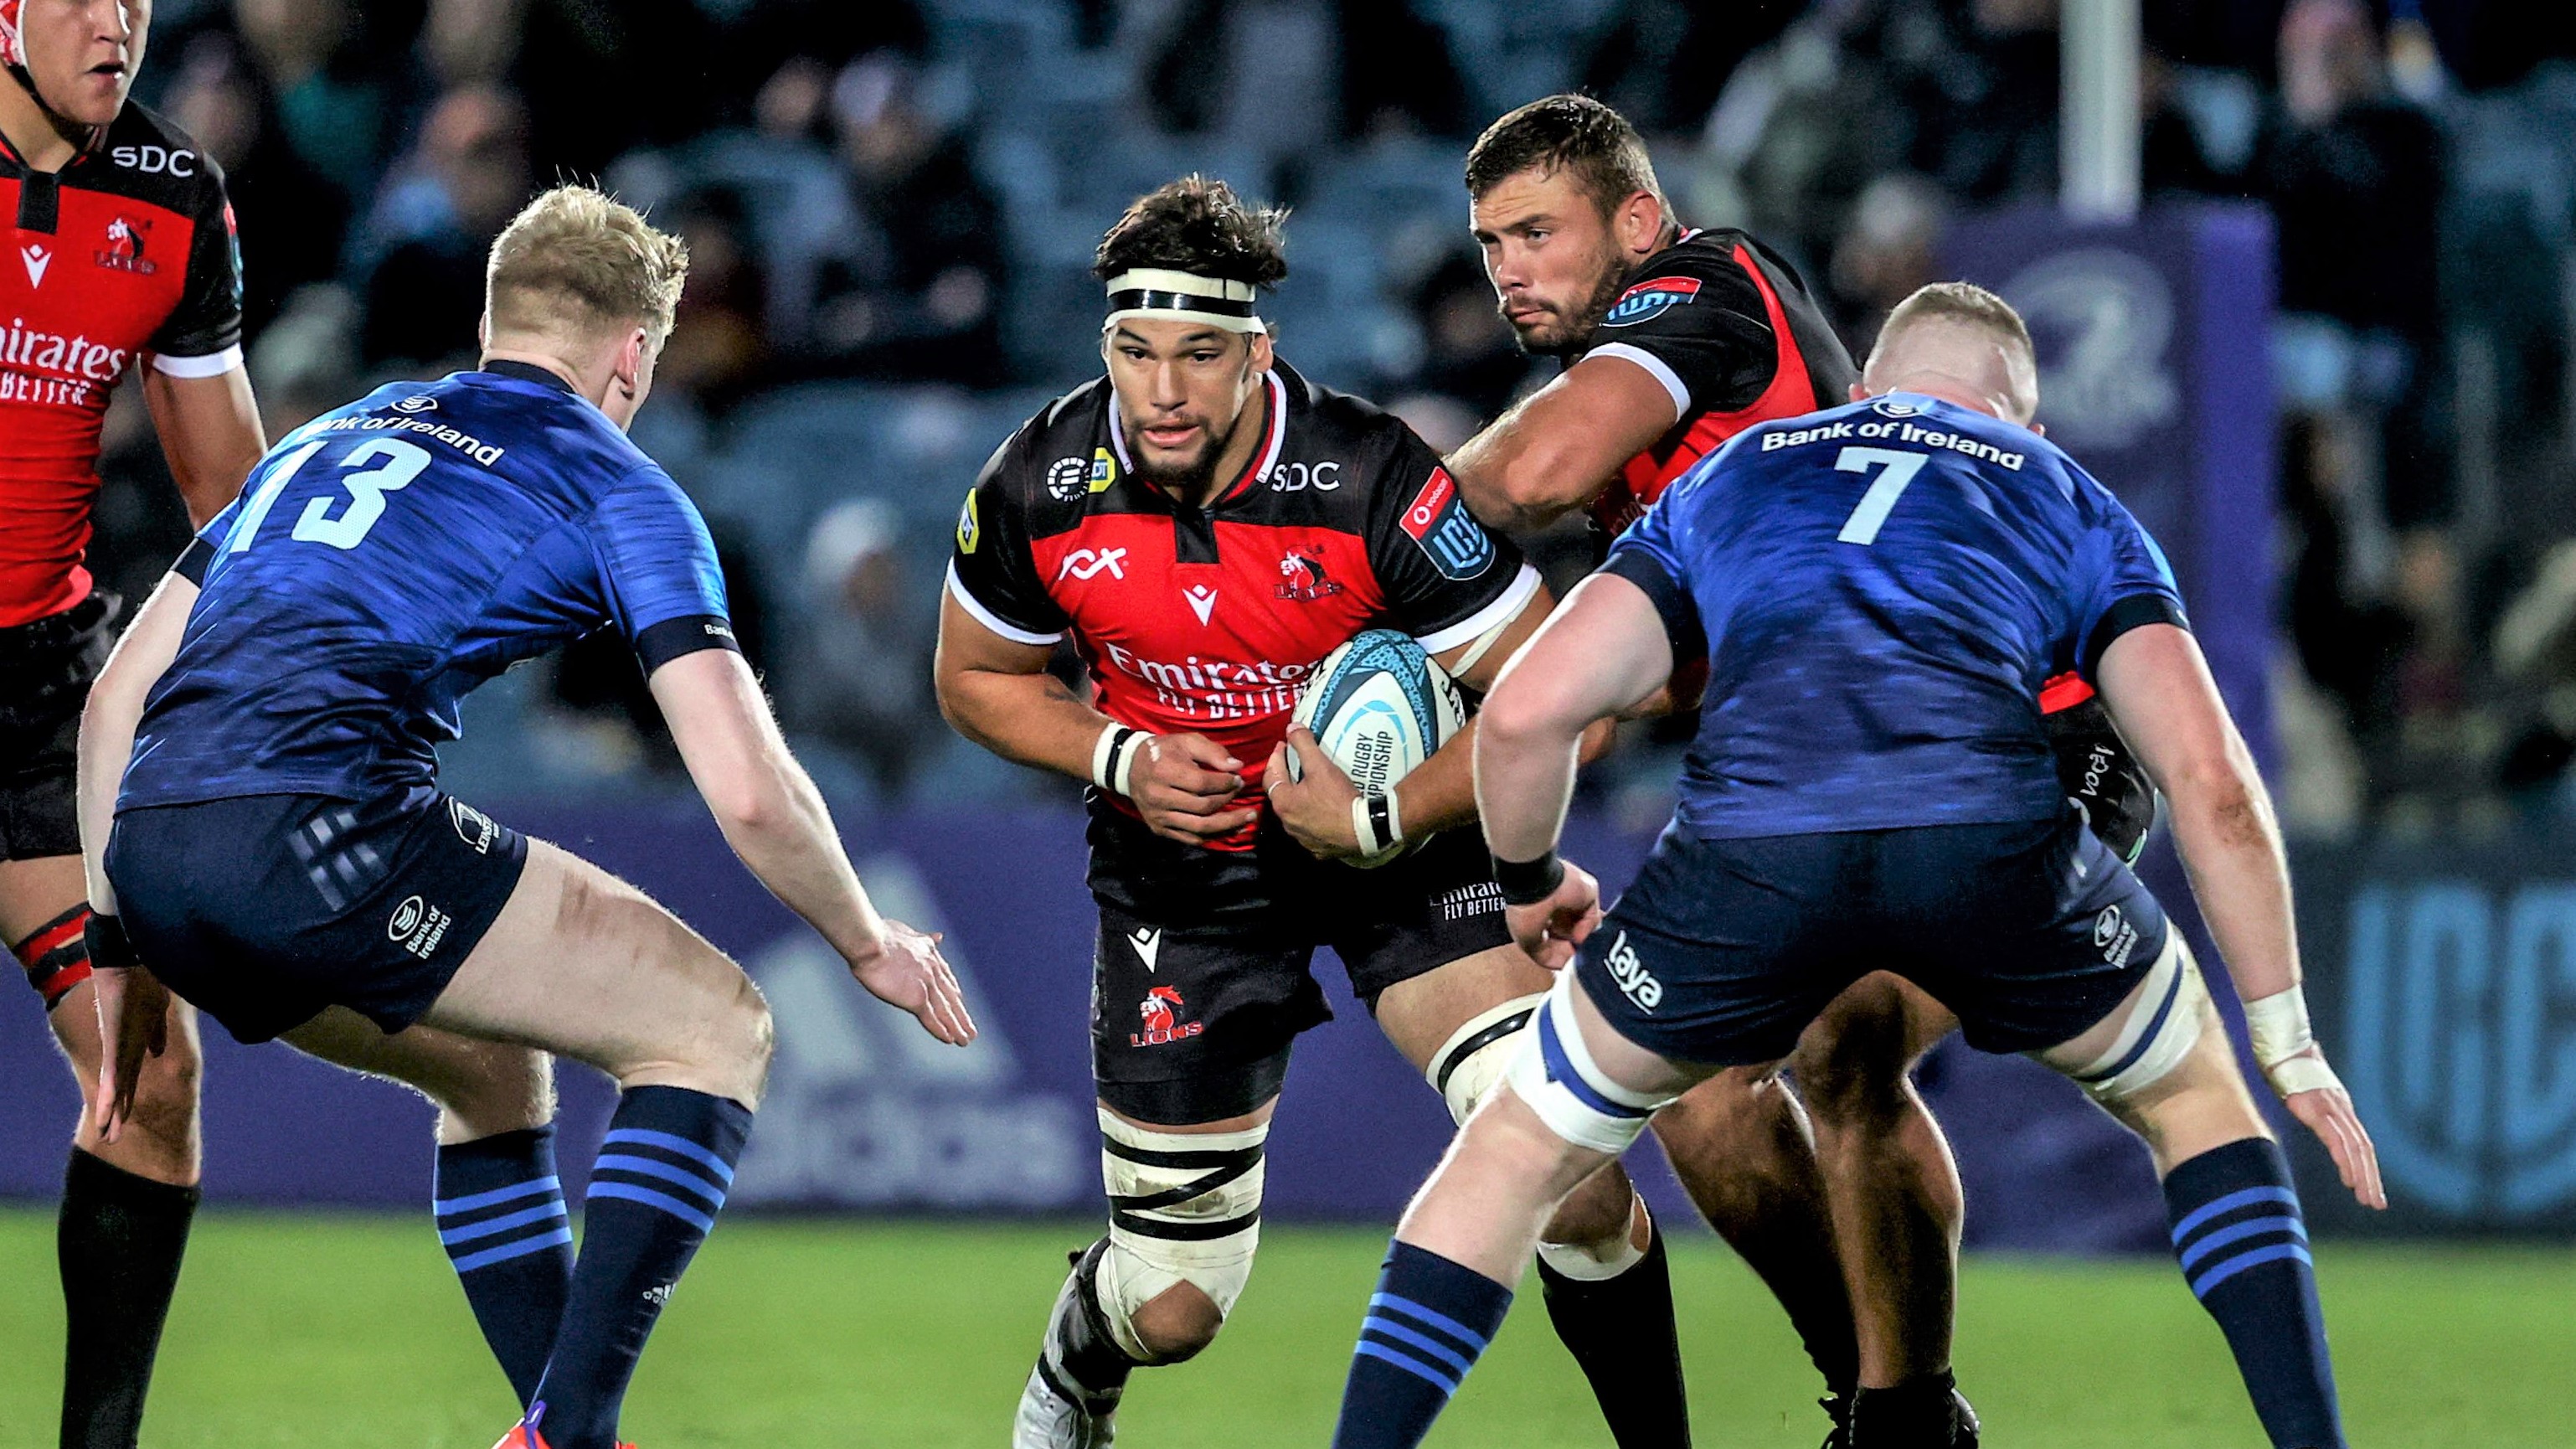 Mandatory Credit: Photo by Dan Sheridan/INPHO/Shutterstock/BackpagePix (12823240s) Leinster vs Emirates Lions. Lions' PJ Steenkamp with Dan Leavy and Jamie Osborne of Leinster United Rugby Championship, RDS, Dublin - 25 Feb 2022